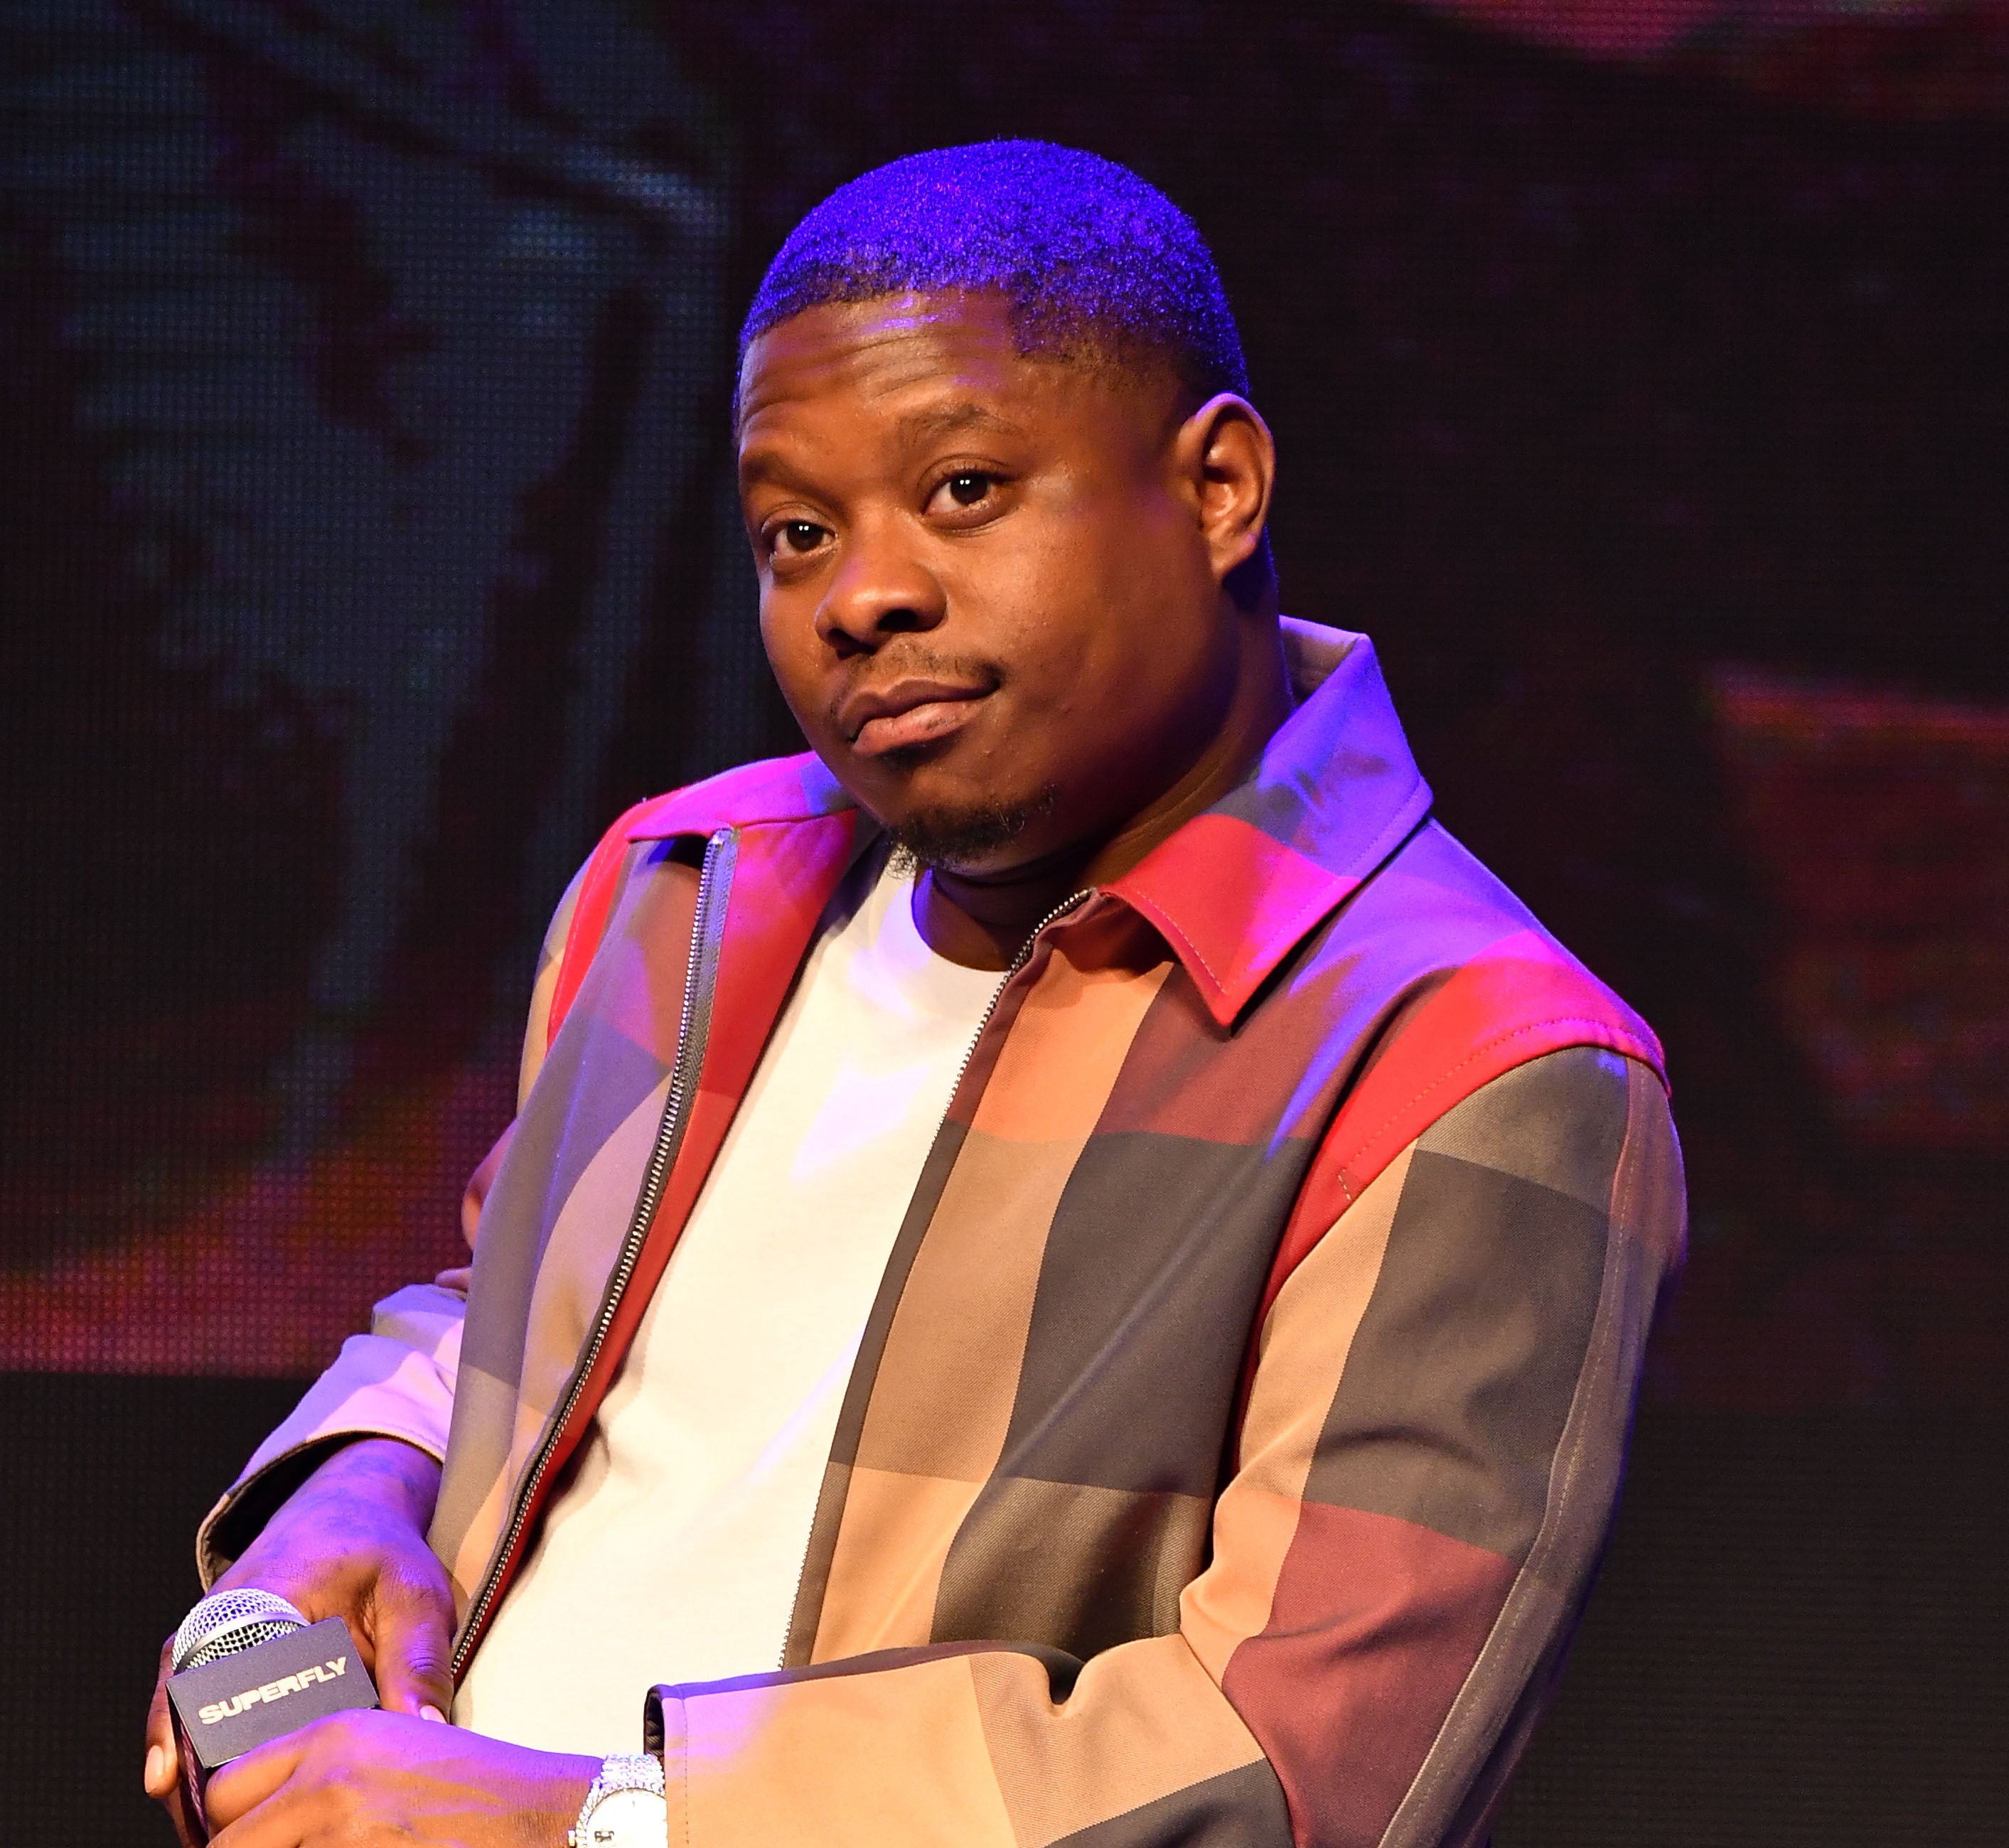 Former 'Chi' Star Jason Mitchell Arrested After Drugs And Guns Allegedly In His SUV